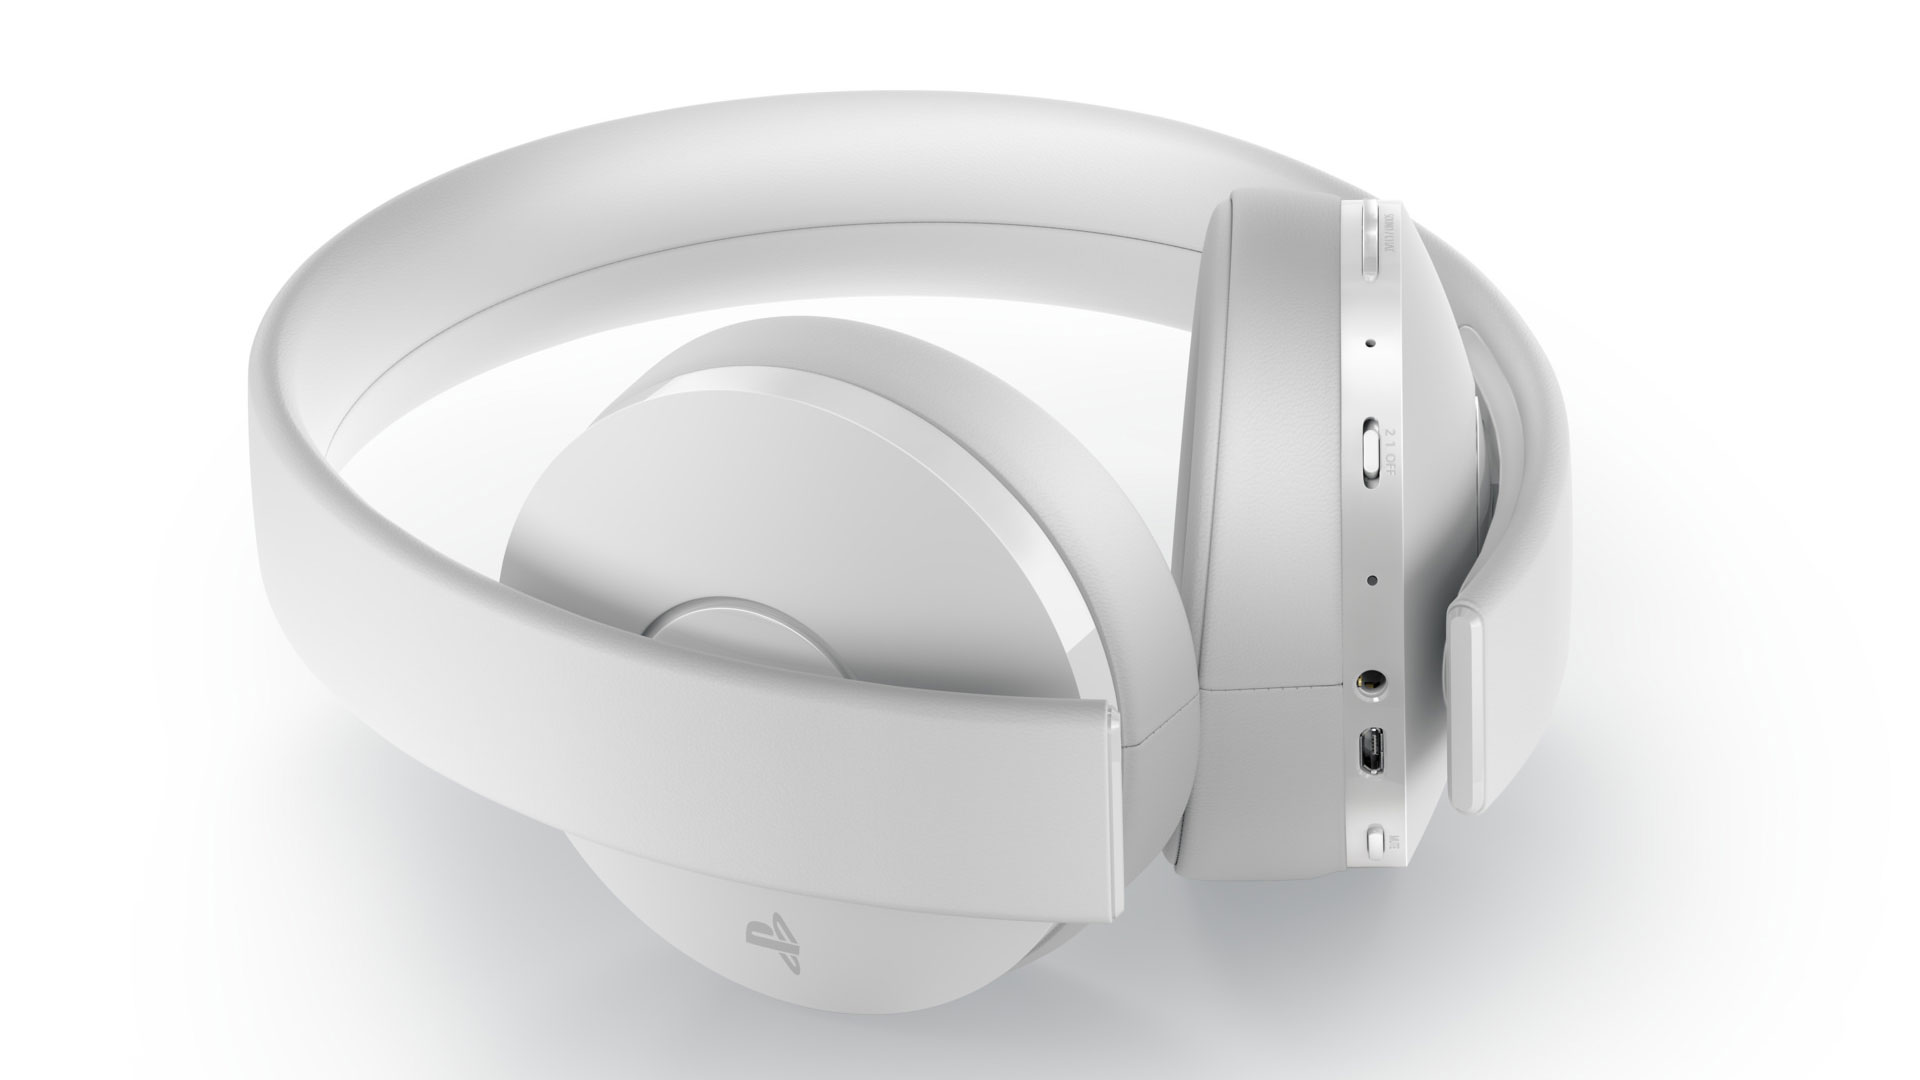 ps4 gold wireless headset white